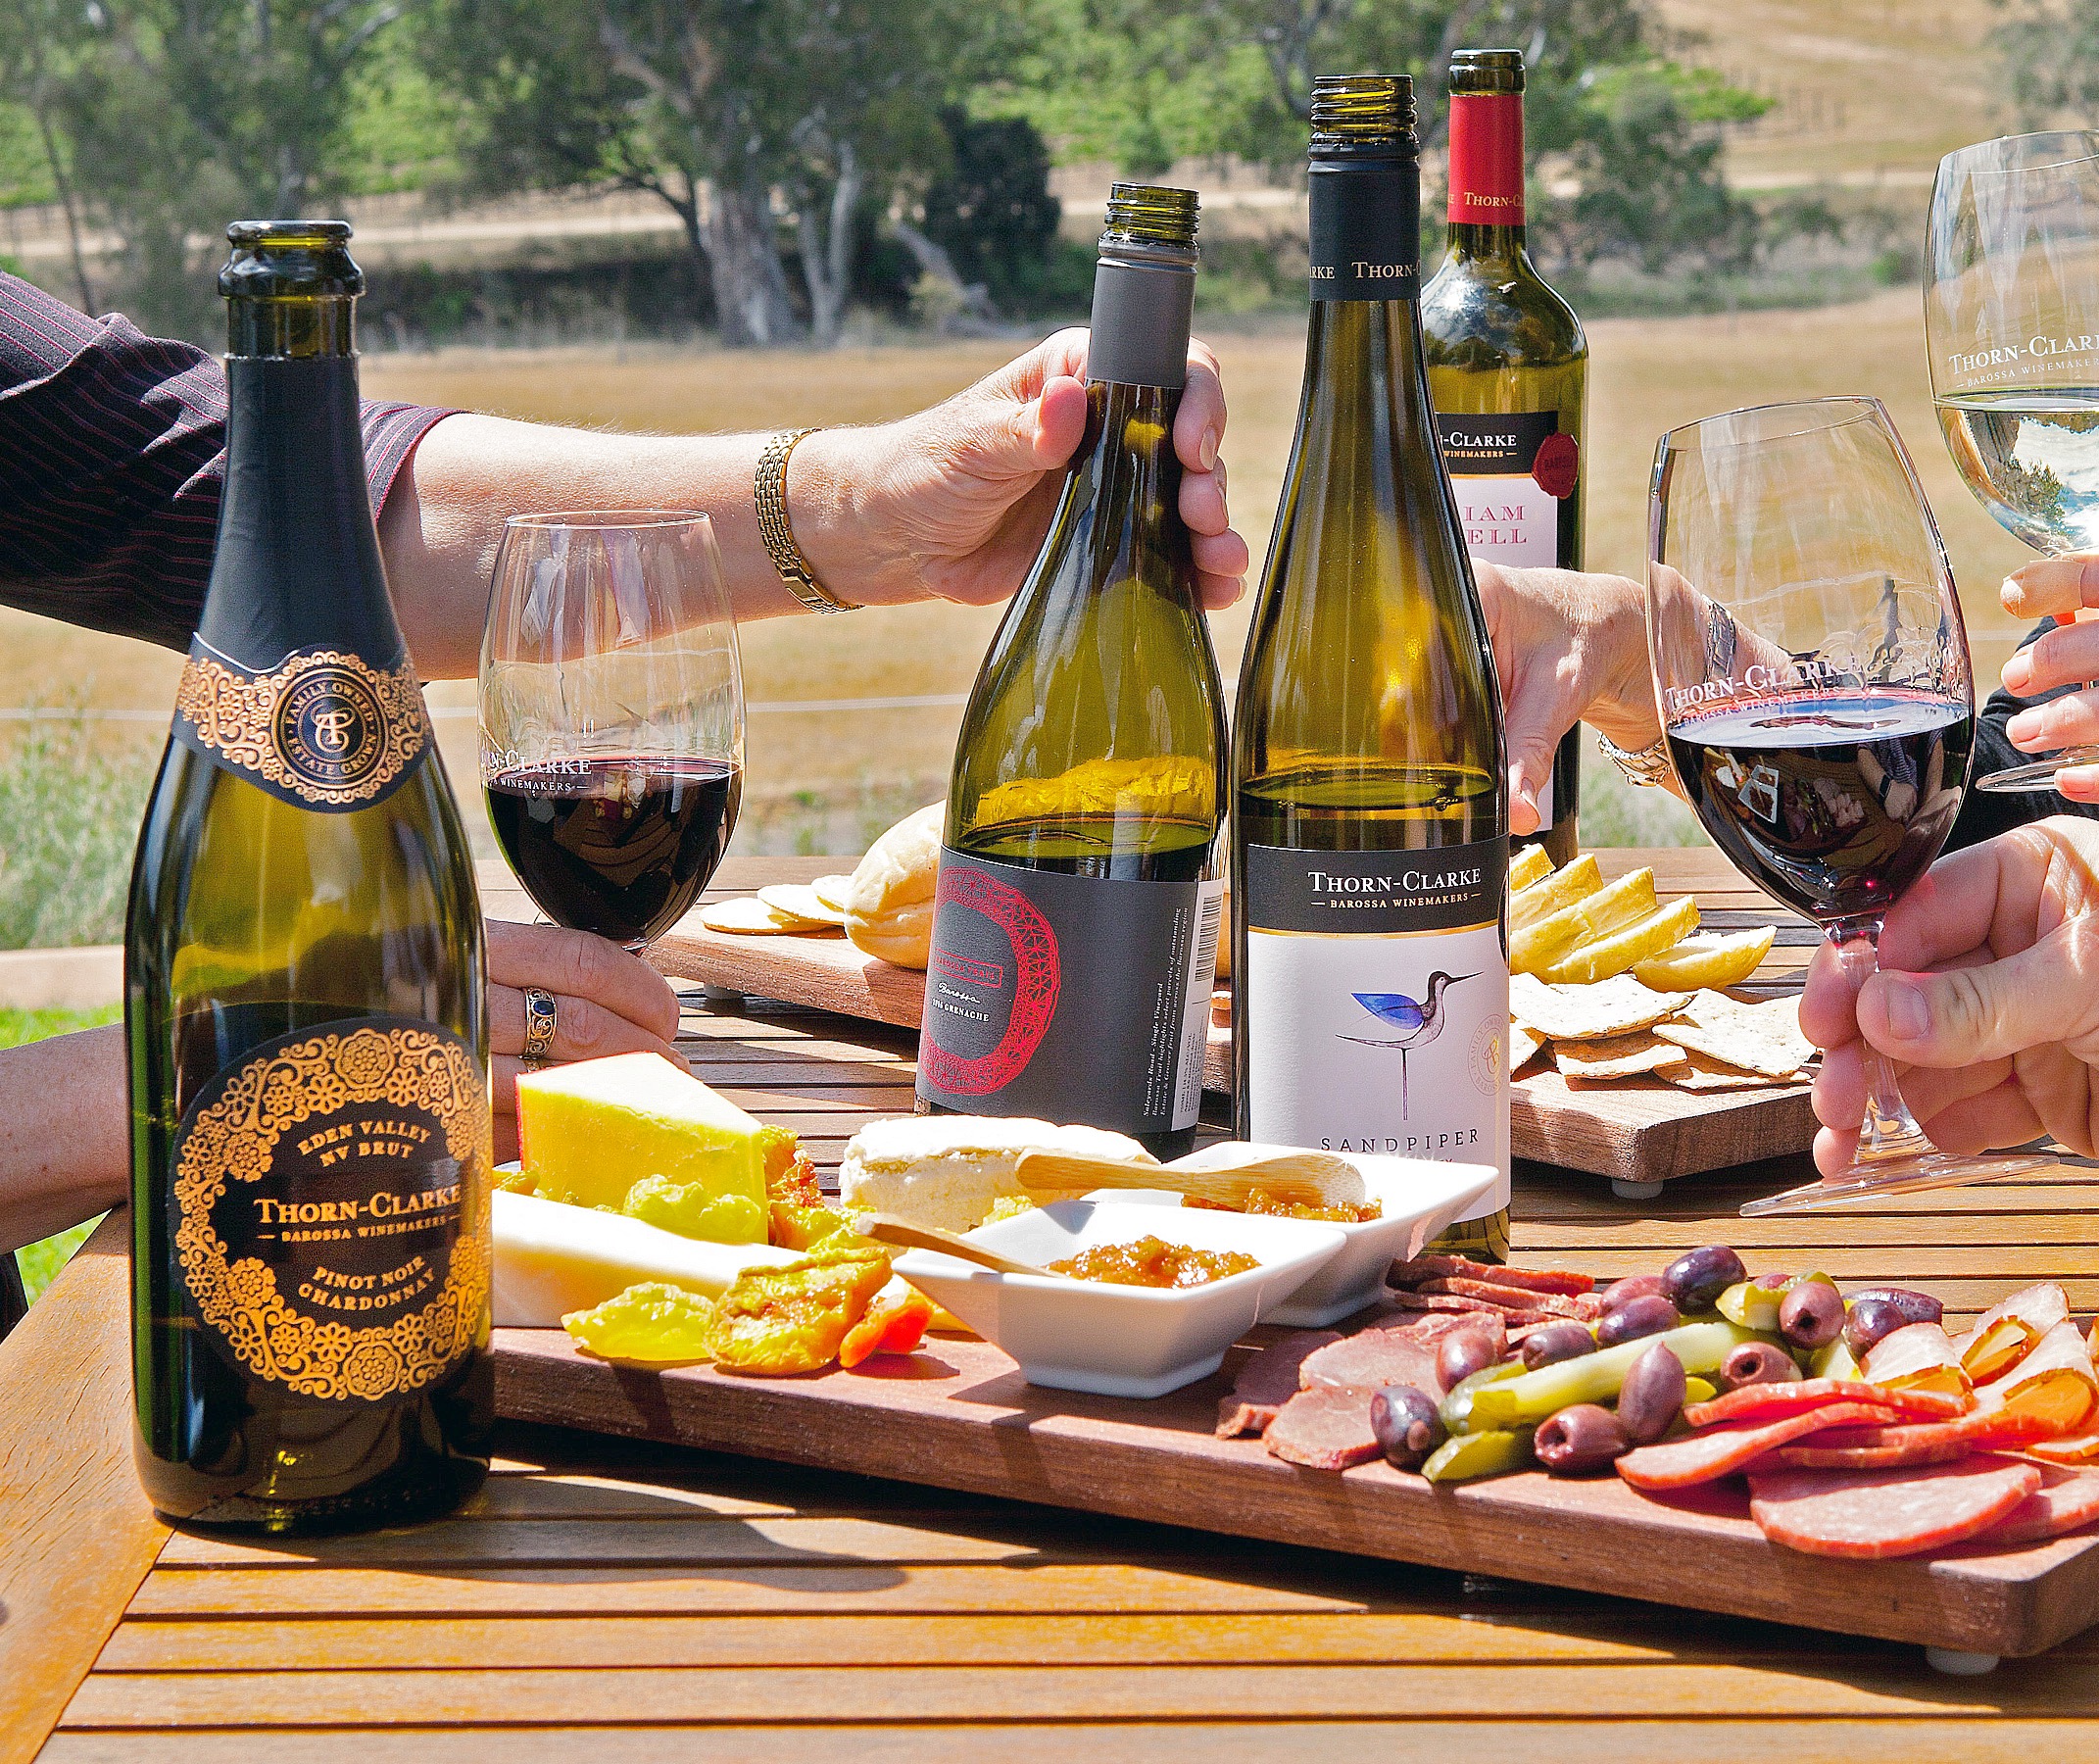 WIN 1 of 3 VIP Cellar Door Experiences for 2 people at Thorn-Clarke Wines